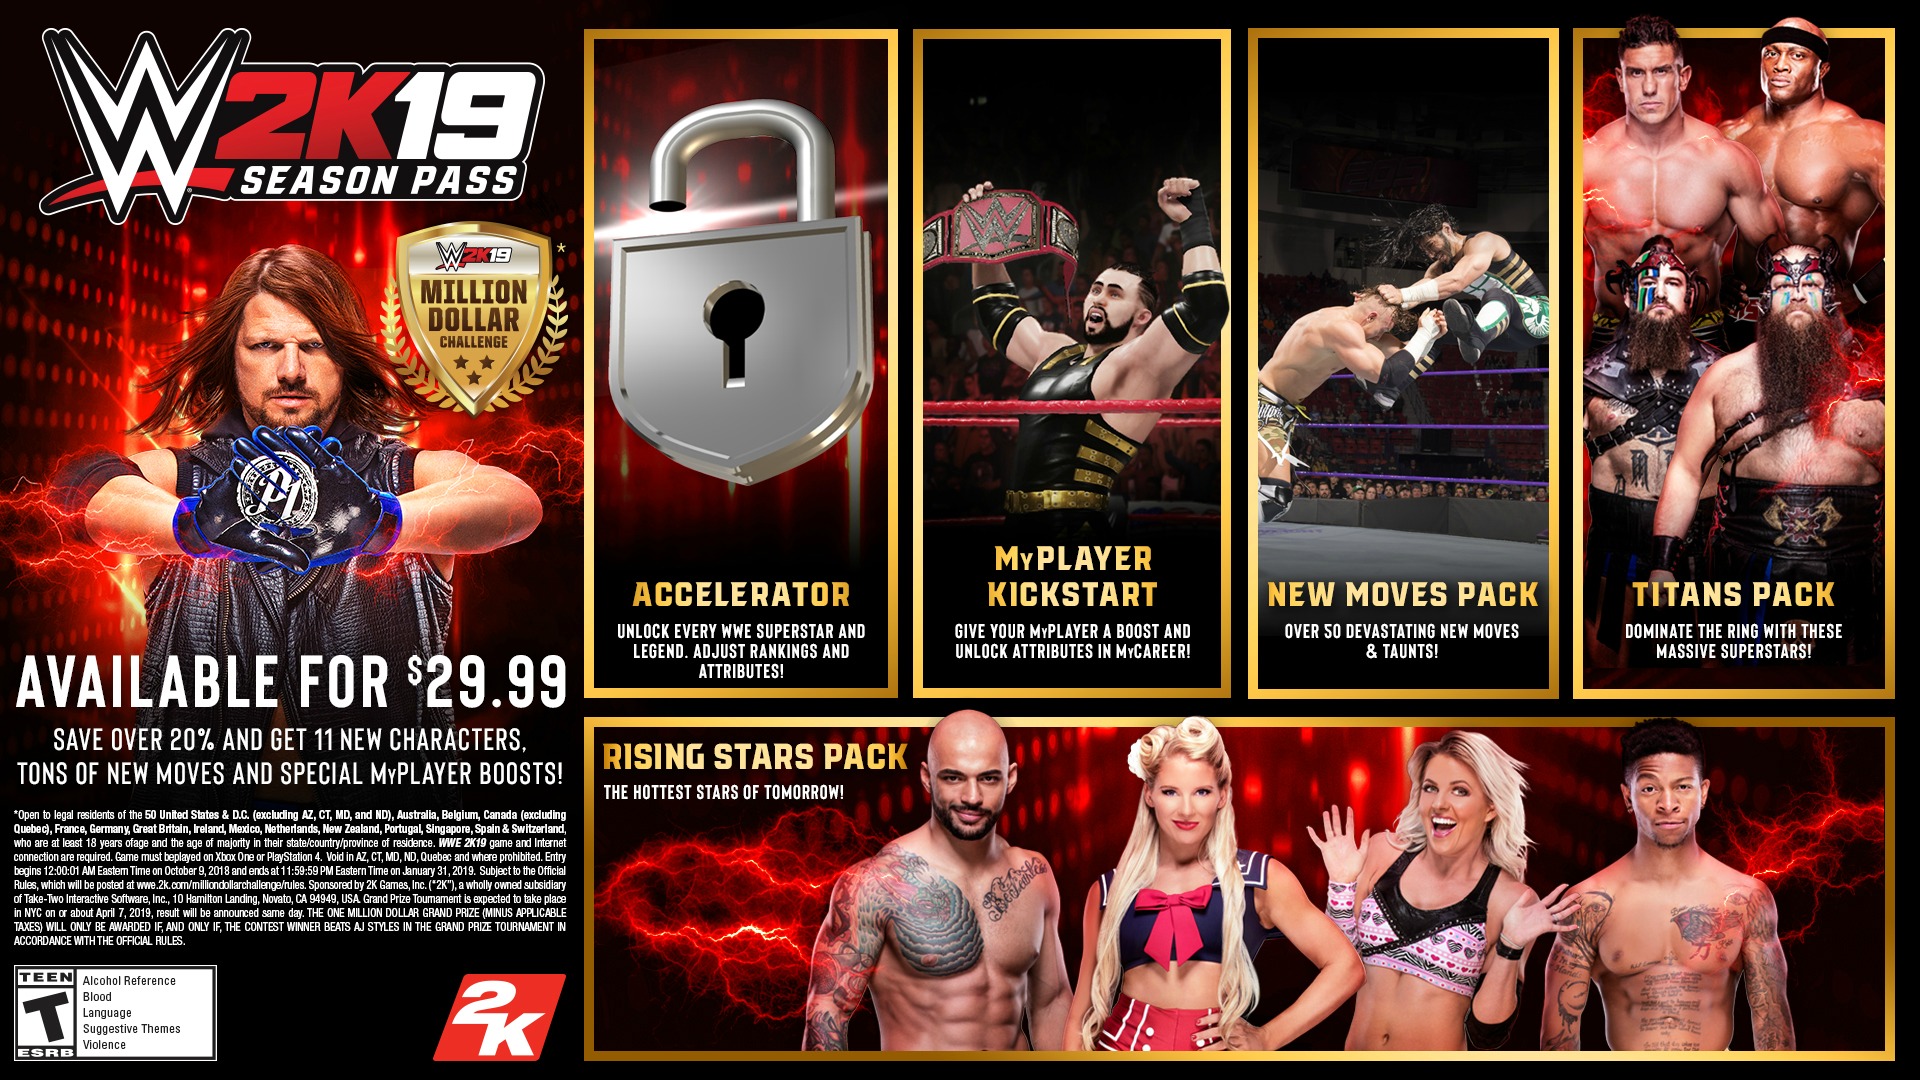 Prices And More Info Revealed For WWE 2K19 DLC Packs